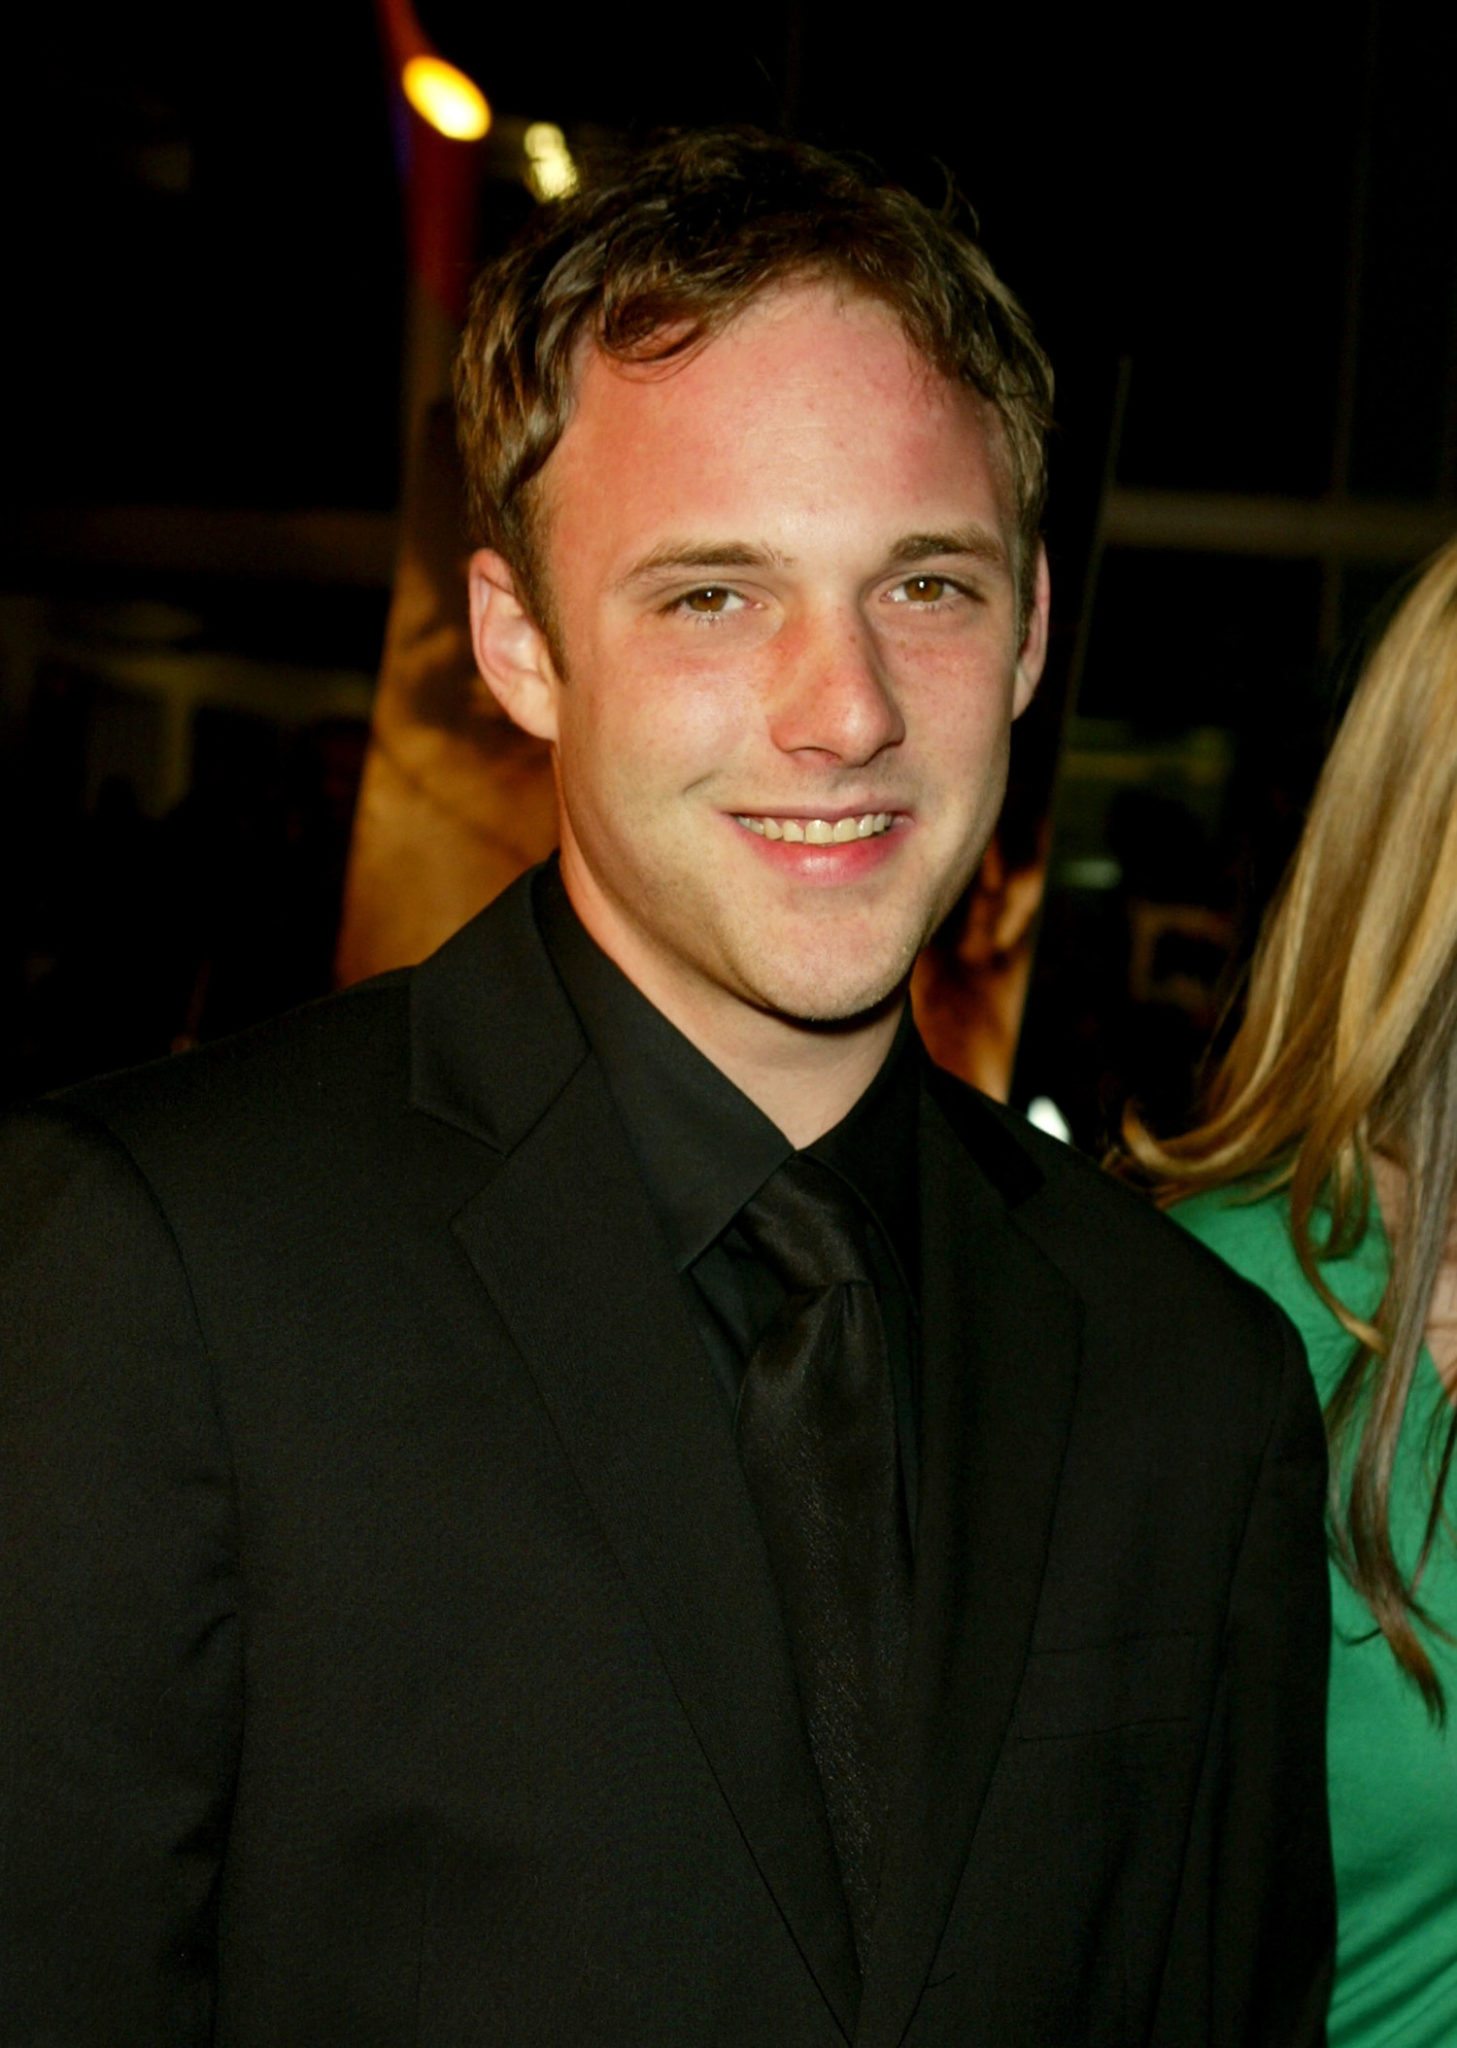 HOLLYWOOD , CA - FEBRUARY 28: Actor Brad Renfro arrives at Warner Independent's Premiere of "The Jacket" at the Pacific ArcLight Theaters on February 28, 2005 in Hollywood, California. (Photo by Kevin Winter/Getty Images)